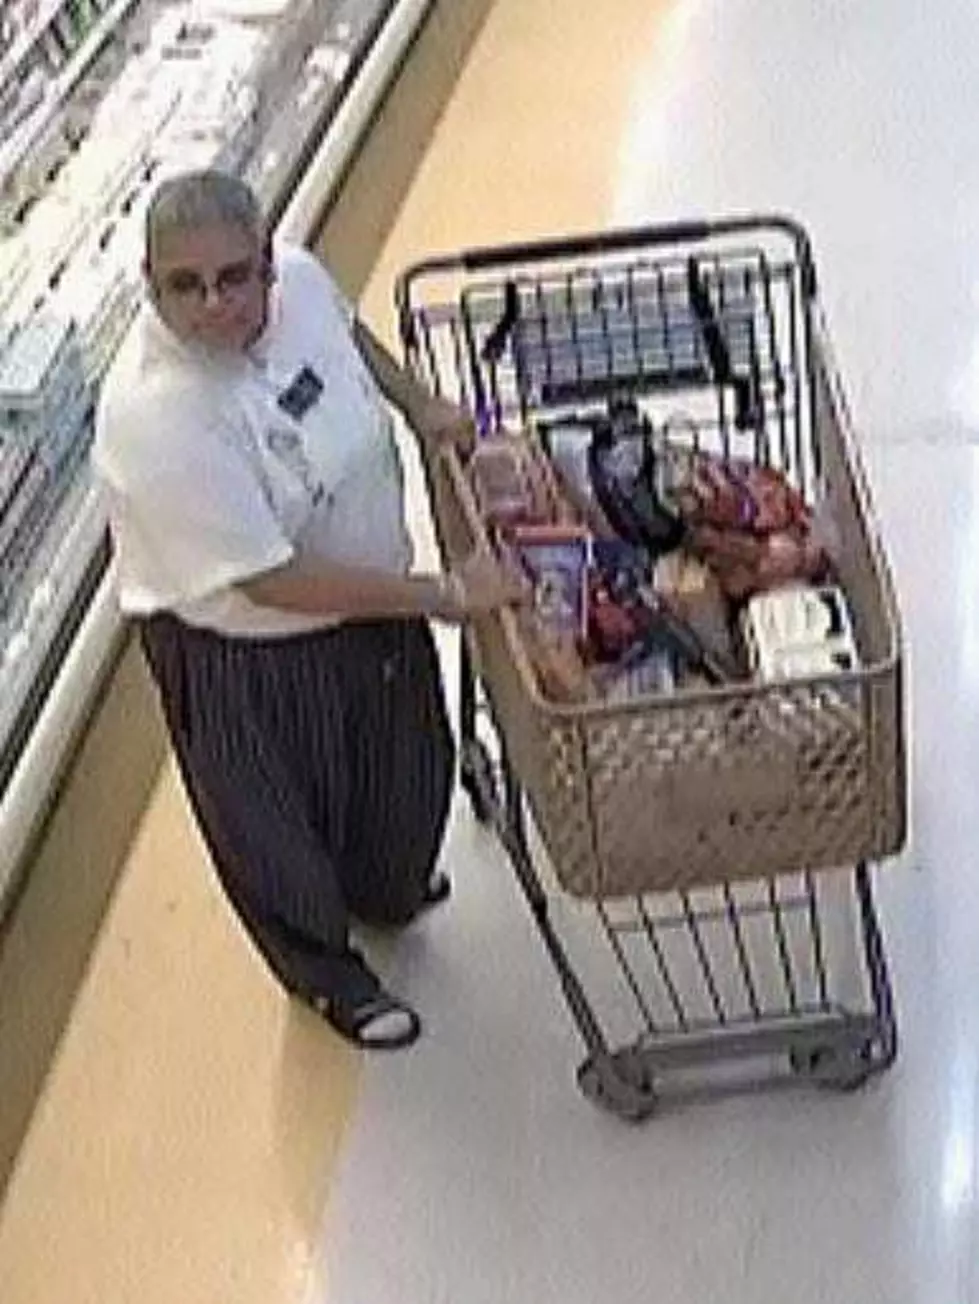 UPDATE: Long Branch Police identify woman who stole wallet and iPhone